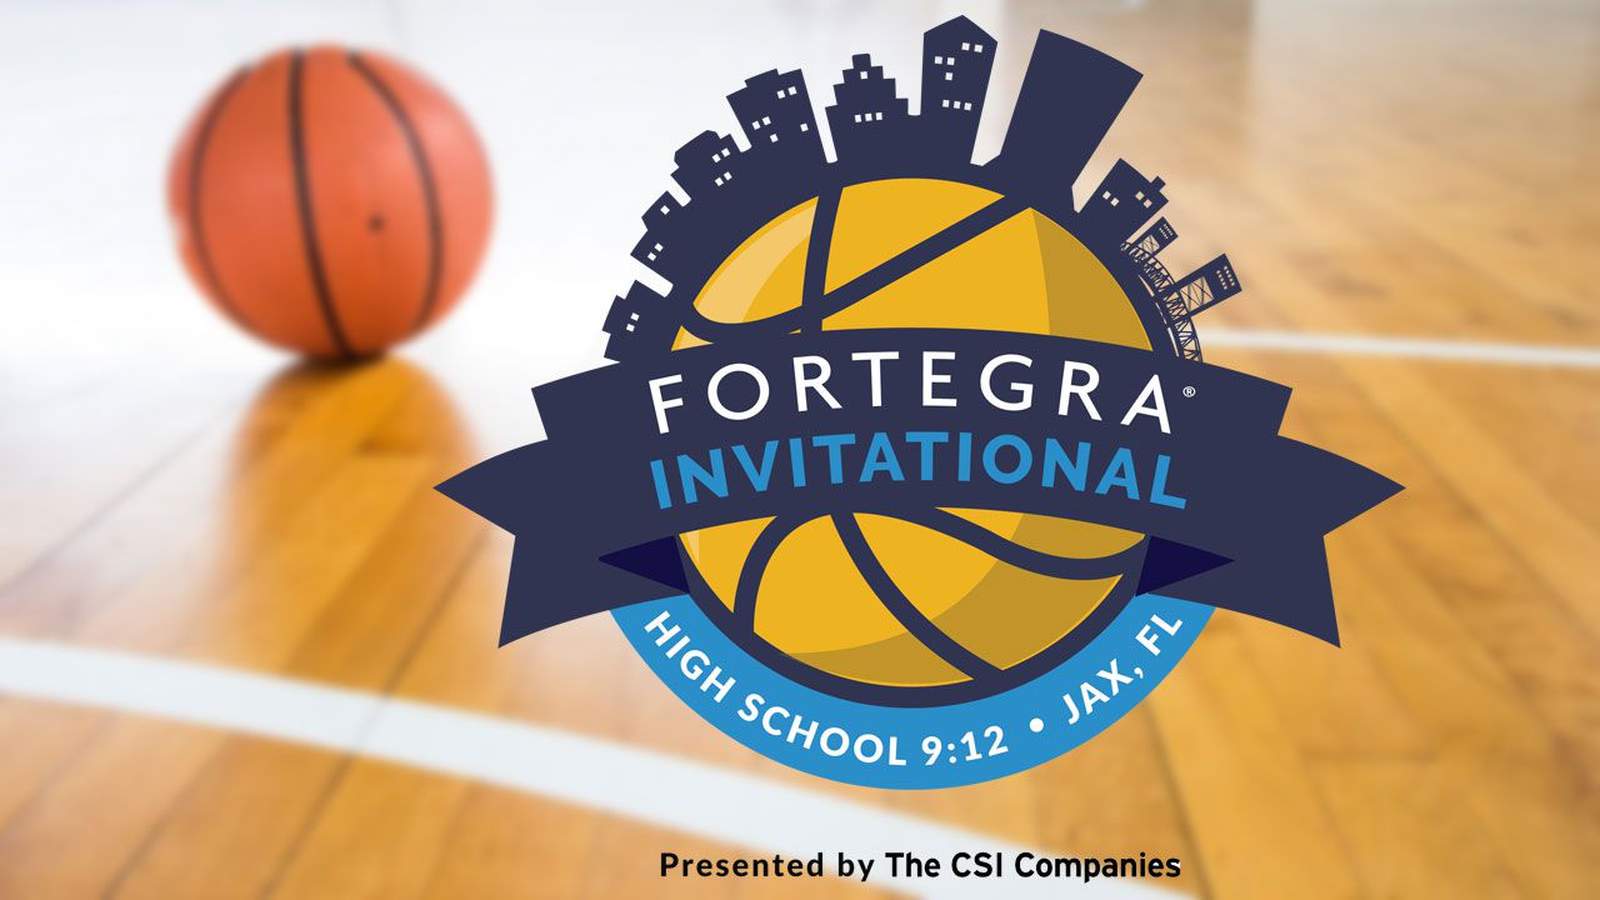 Lee tops Bolles to win 3rd Fortegra Basketball Invitational tournament